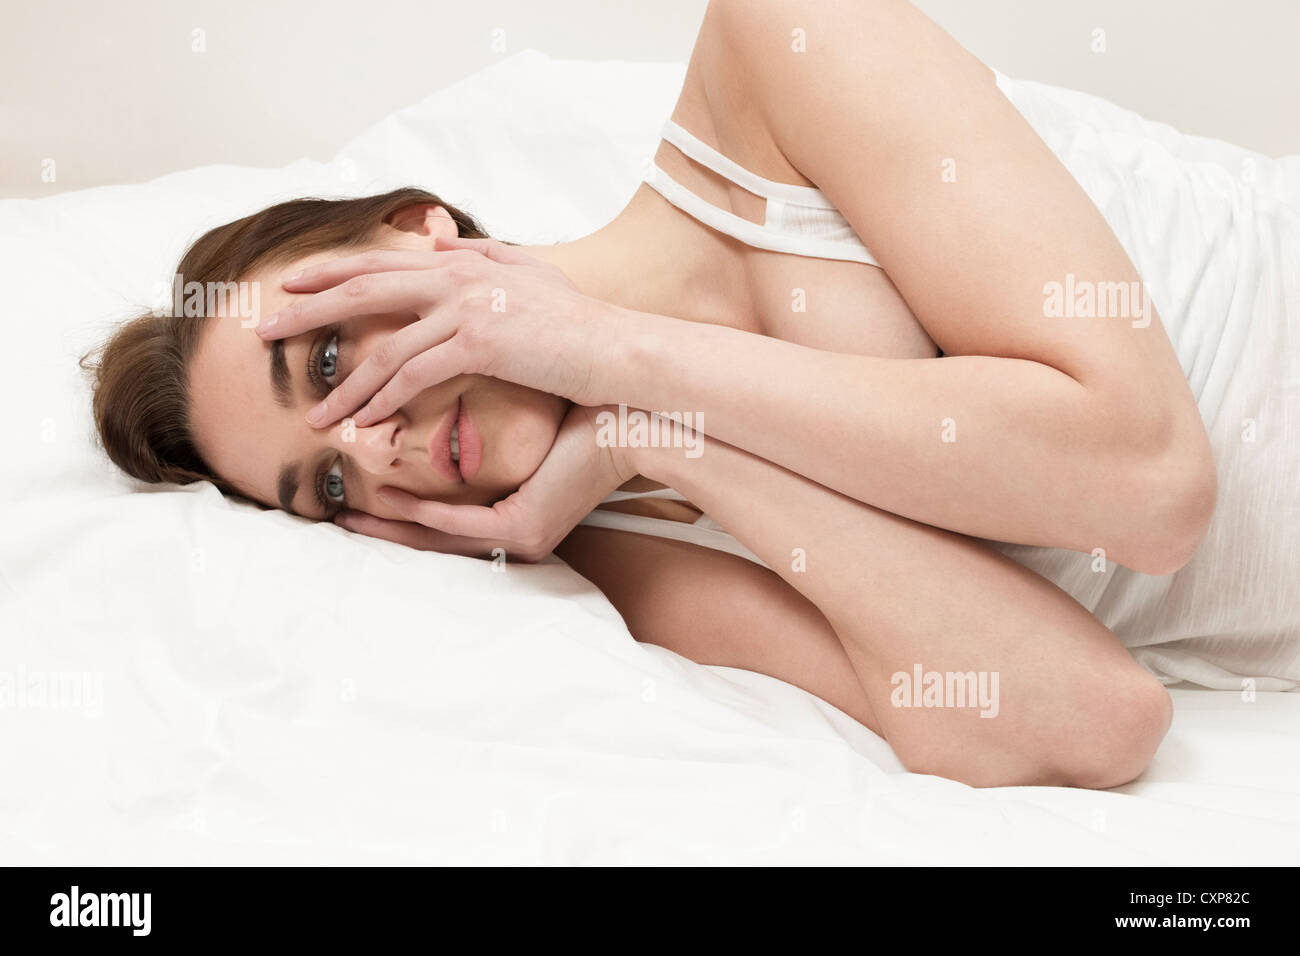 Insomnia, nightmare - woman awake in bed thinking because she can't sleep Stock Photo